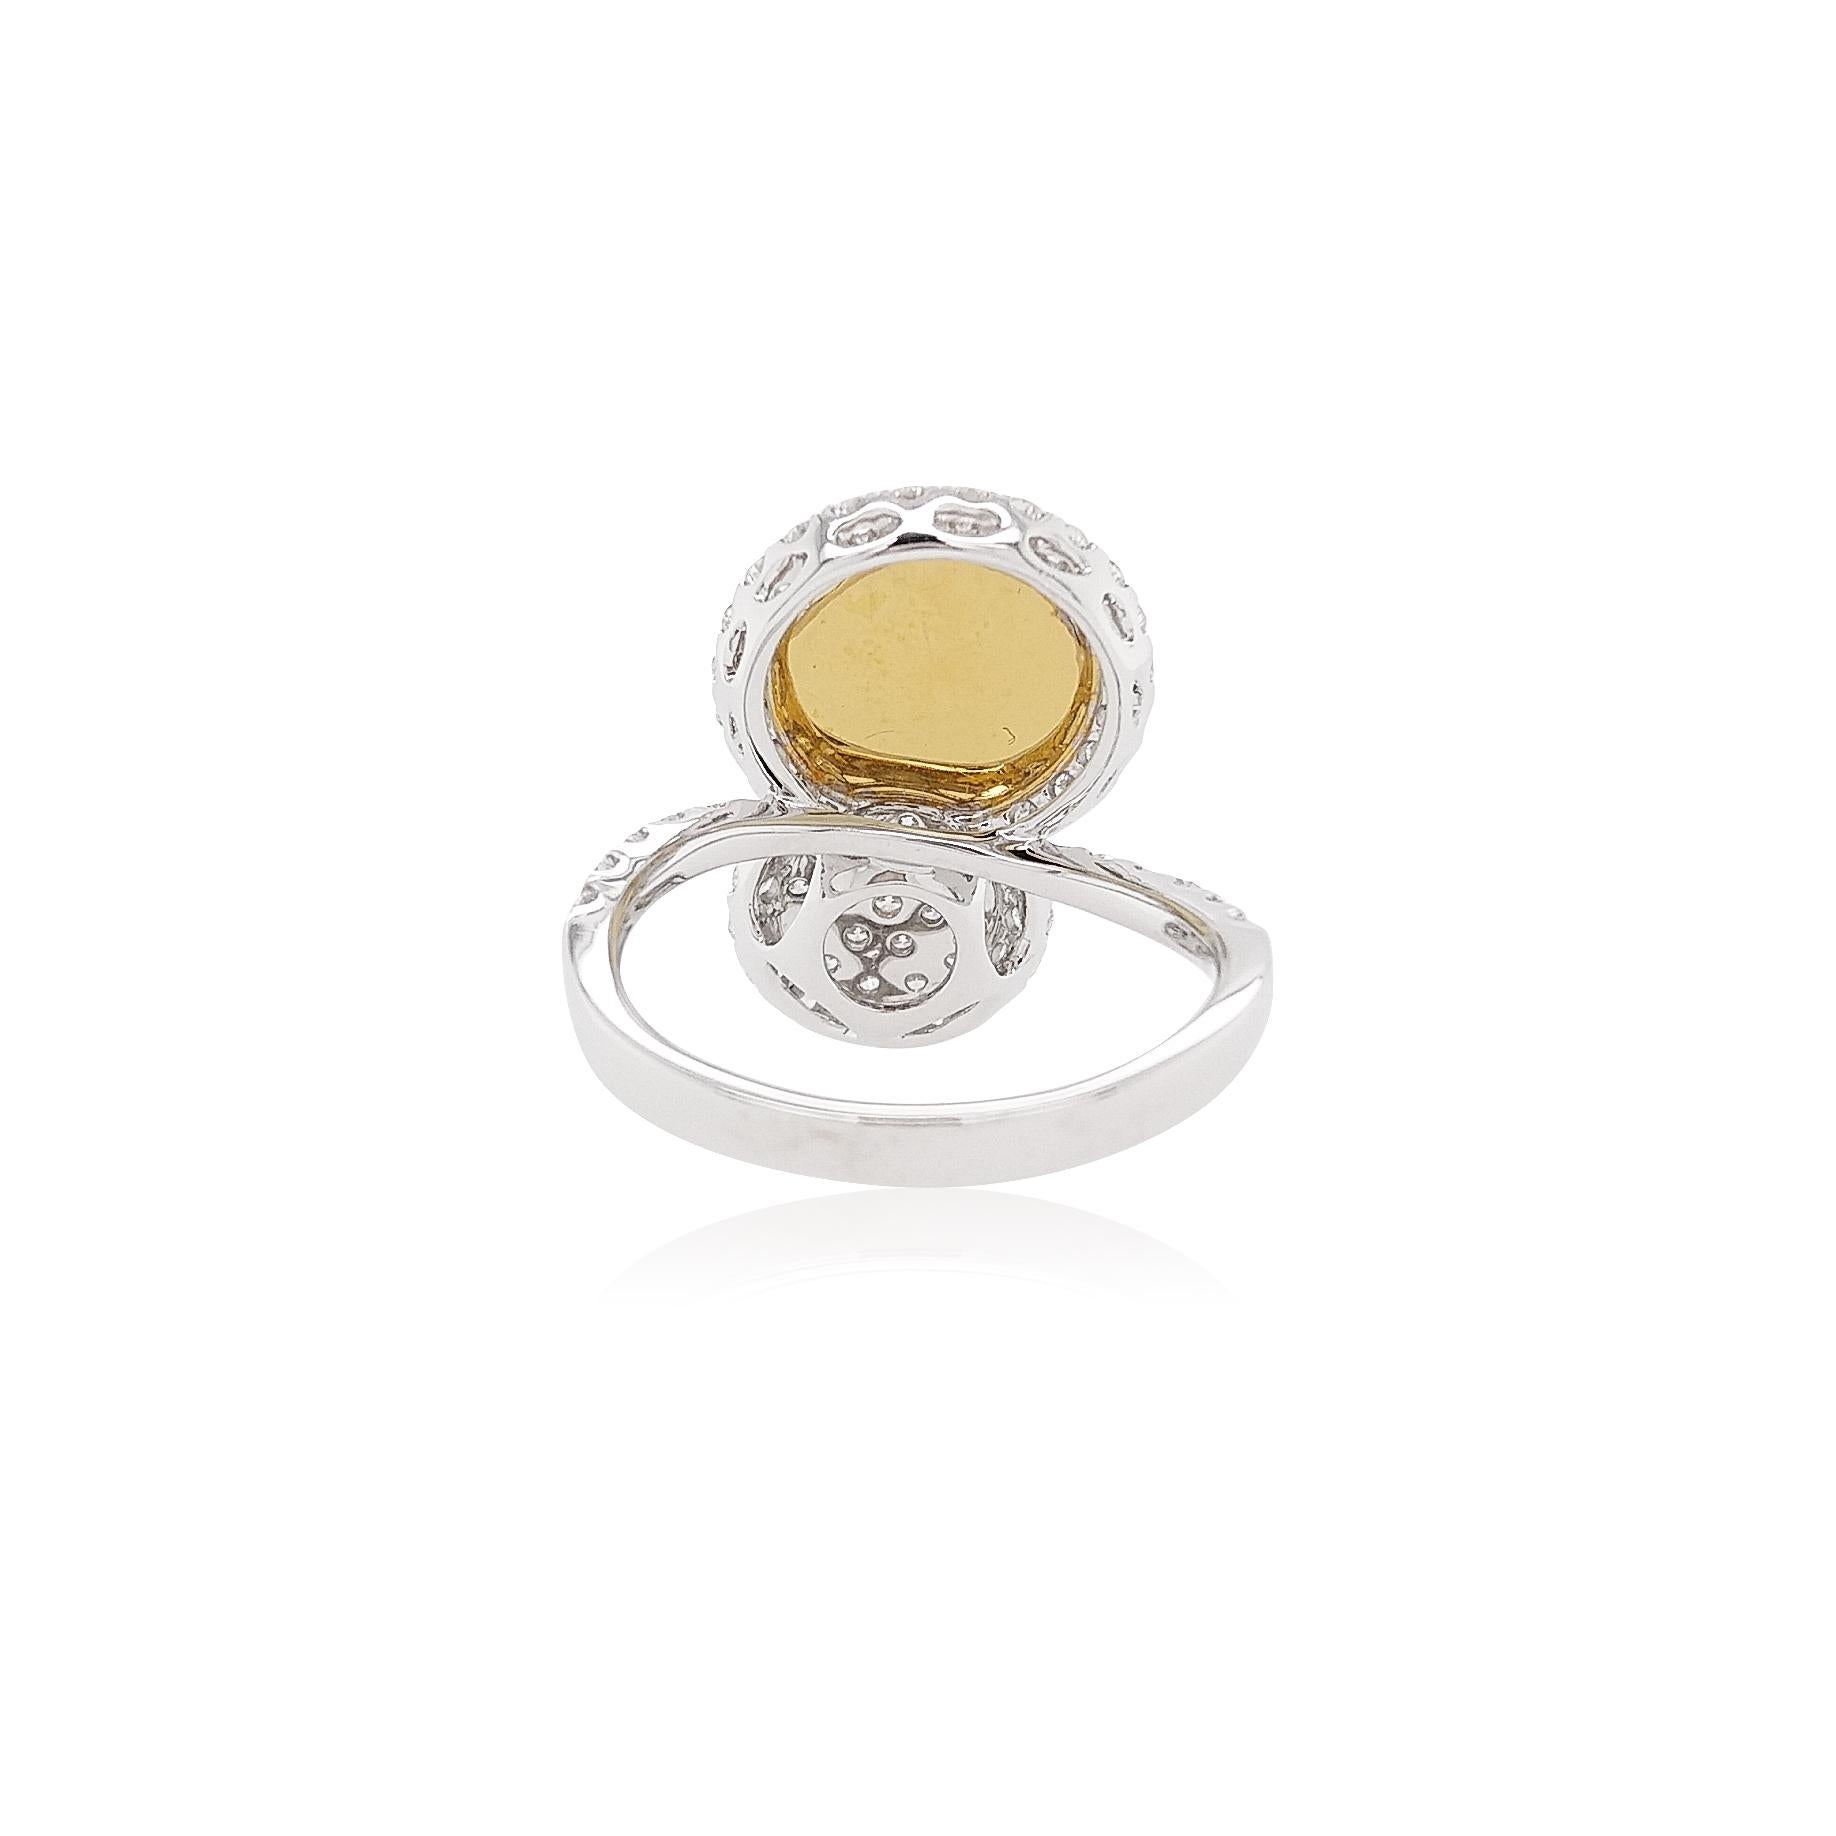 This exquisite platinum ring features lustrous crisp natural Yellow Diamonds perfectly offset by the delicate white diamonds which surround them, alongside scintillating White Diamonds. A perfect statement piece, this ring will add a touch of